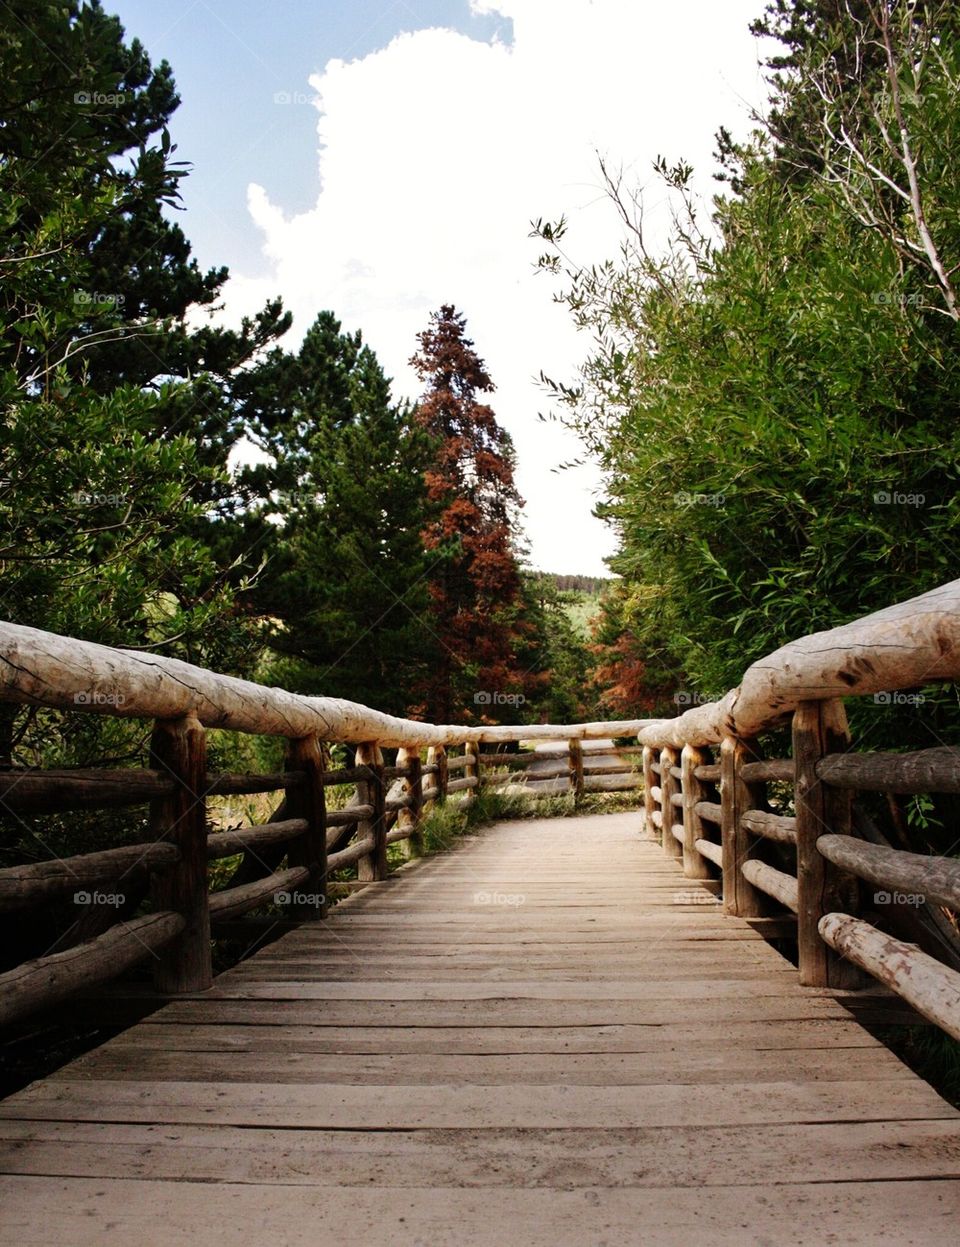 Wooden bridge surrounded by trees